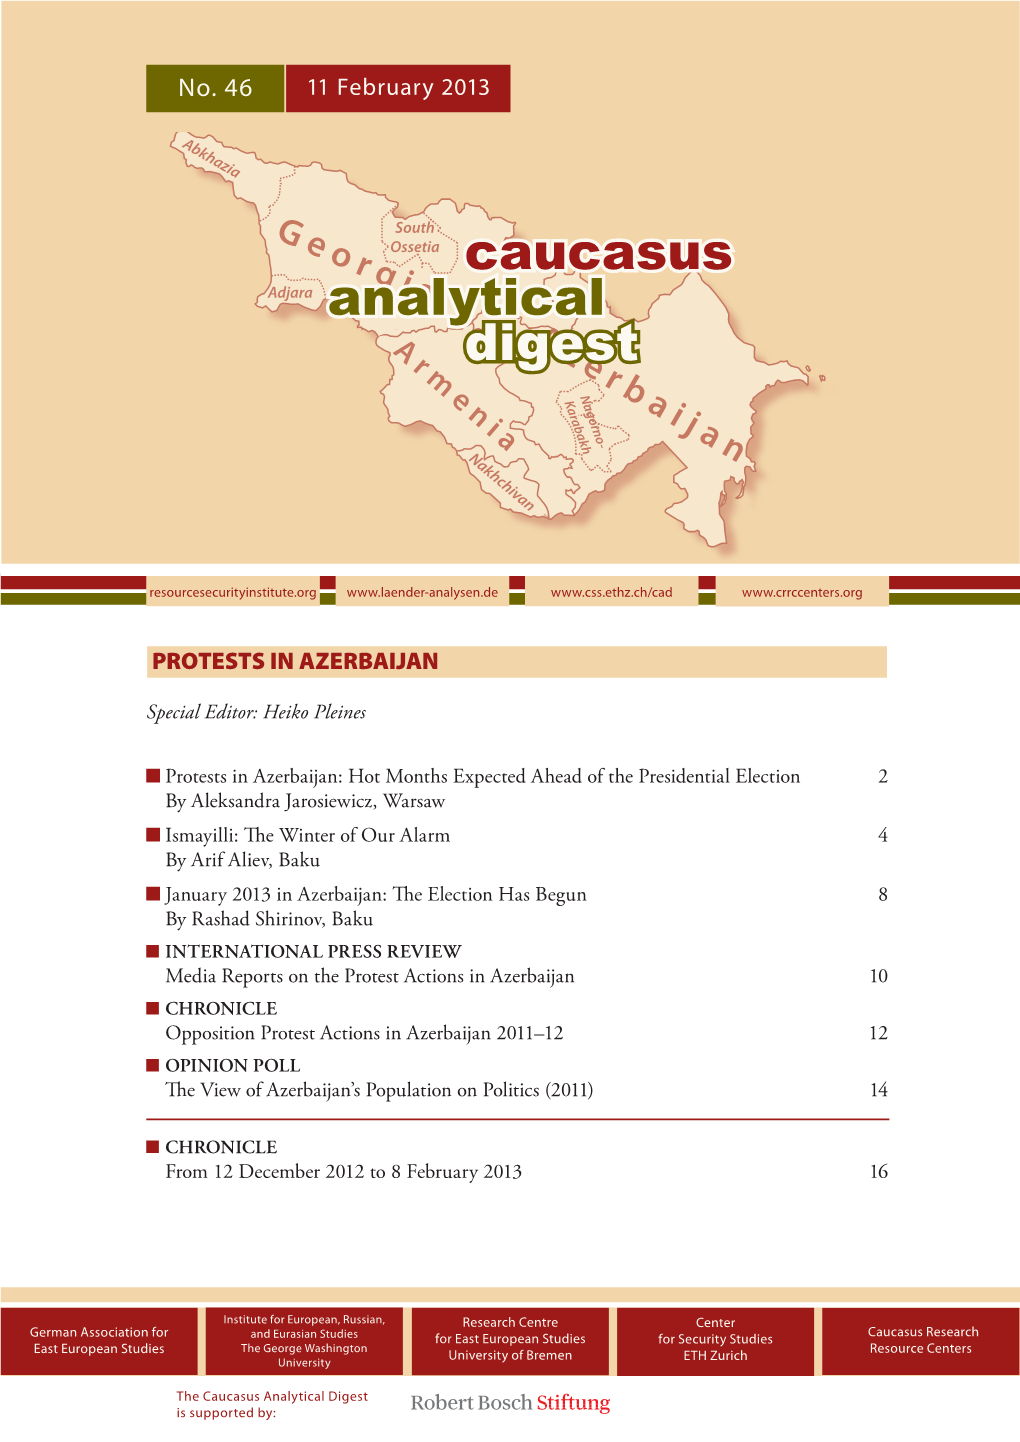 No 46 Caucasus Analytical Digest: Protests in Azerbaijan